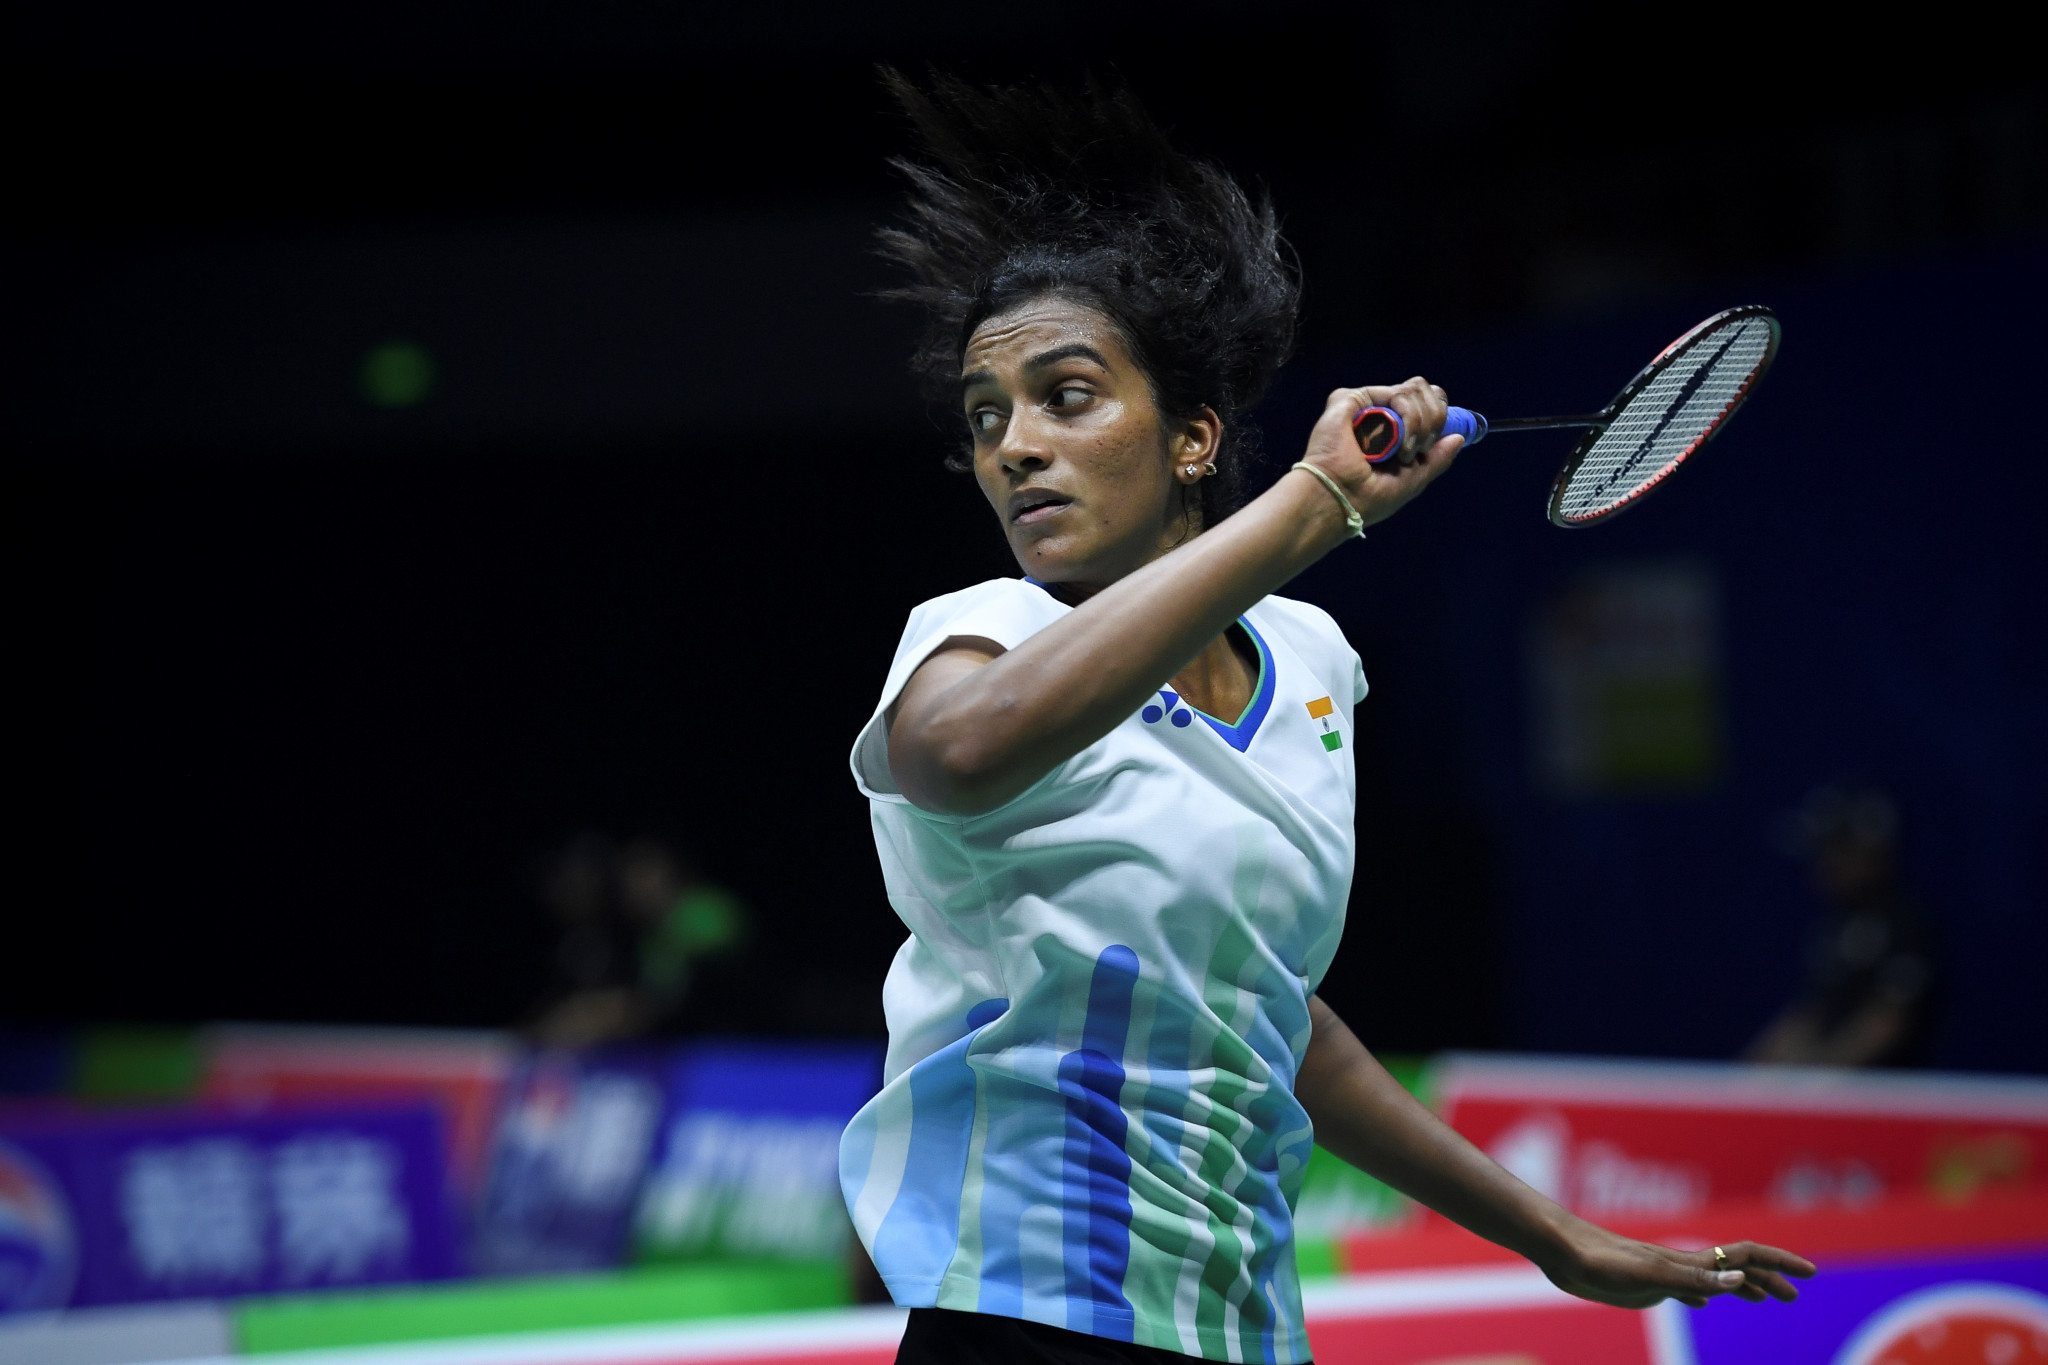 India’s Pusarla Venkata Sindhu suffered a surprise second-round loss to Thailand’s Nitchaon Jindapol as action continued today at the BWF Australian Open in Sydney ©Getty Images